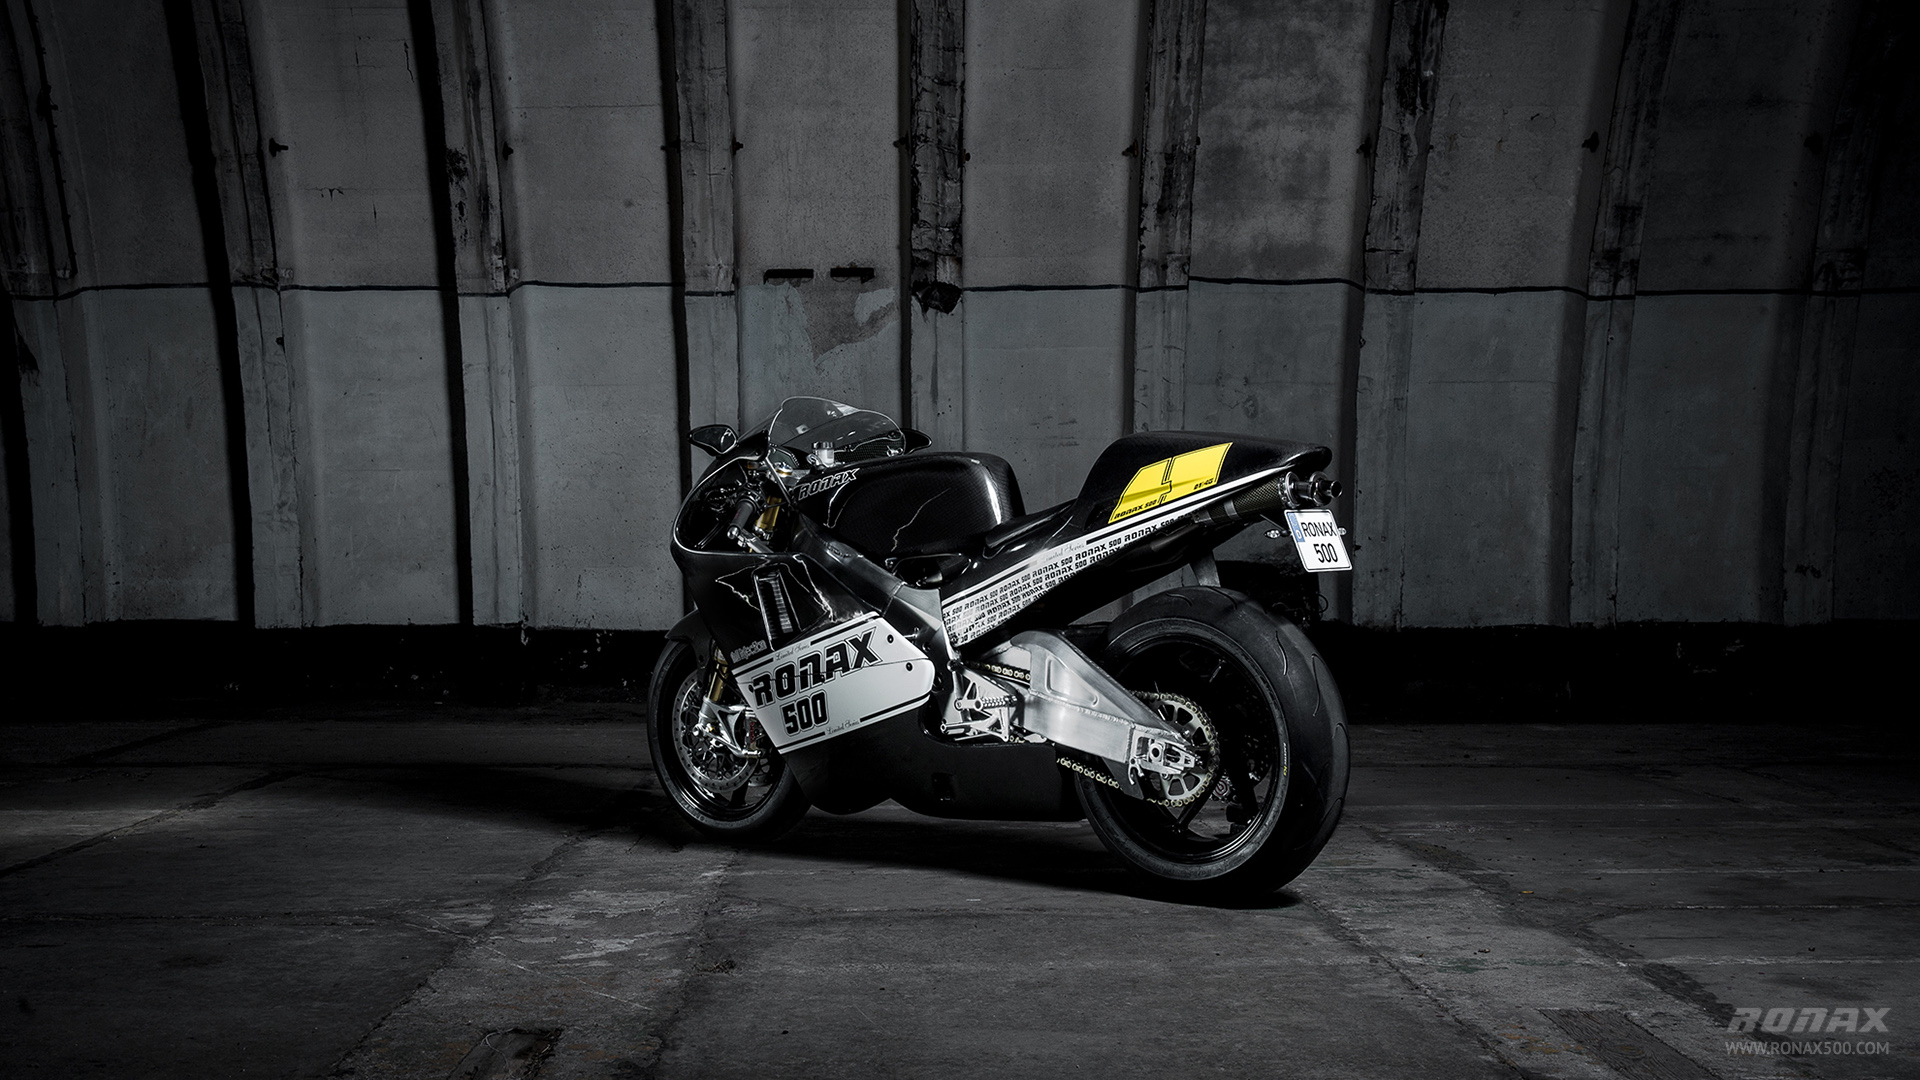 The £100,000 GP bike for the road